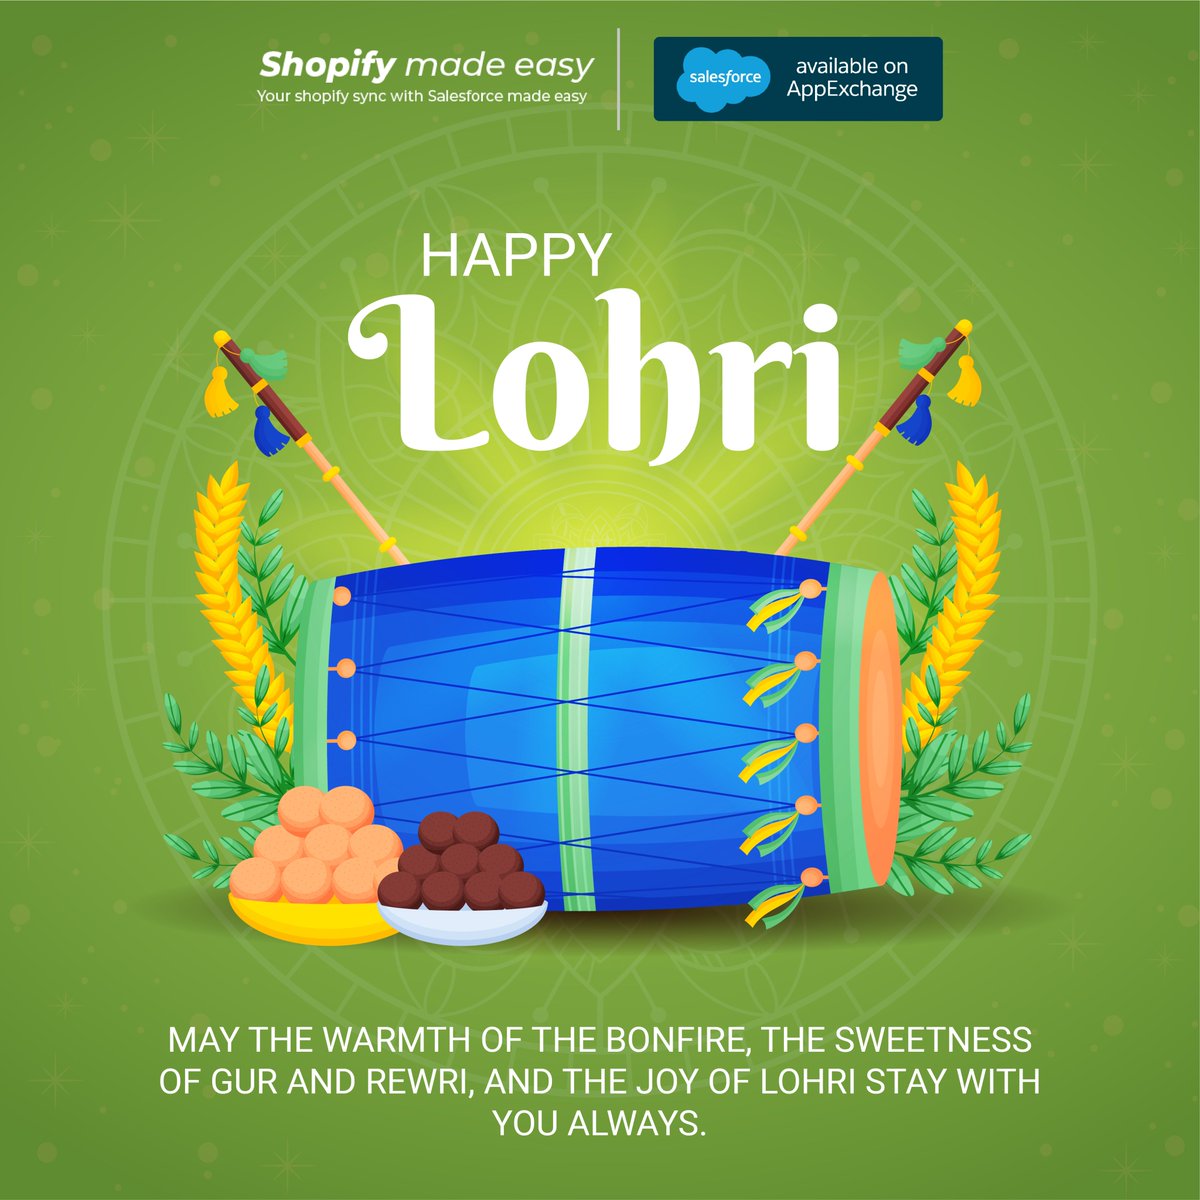 Warm wishes to everyone from the team Shopify Made Easy on the vibrant festival of Lohri! May the bonfire of Lohri light up your life with happiness and prosperity.
#LohriFestival #LohriCelebration #LohriBonfire
#PunjabiCulture #LohriVibes #DholBeats